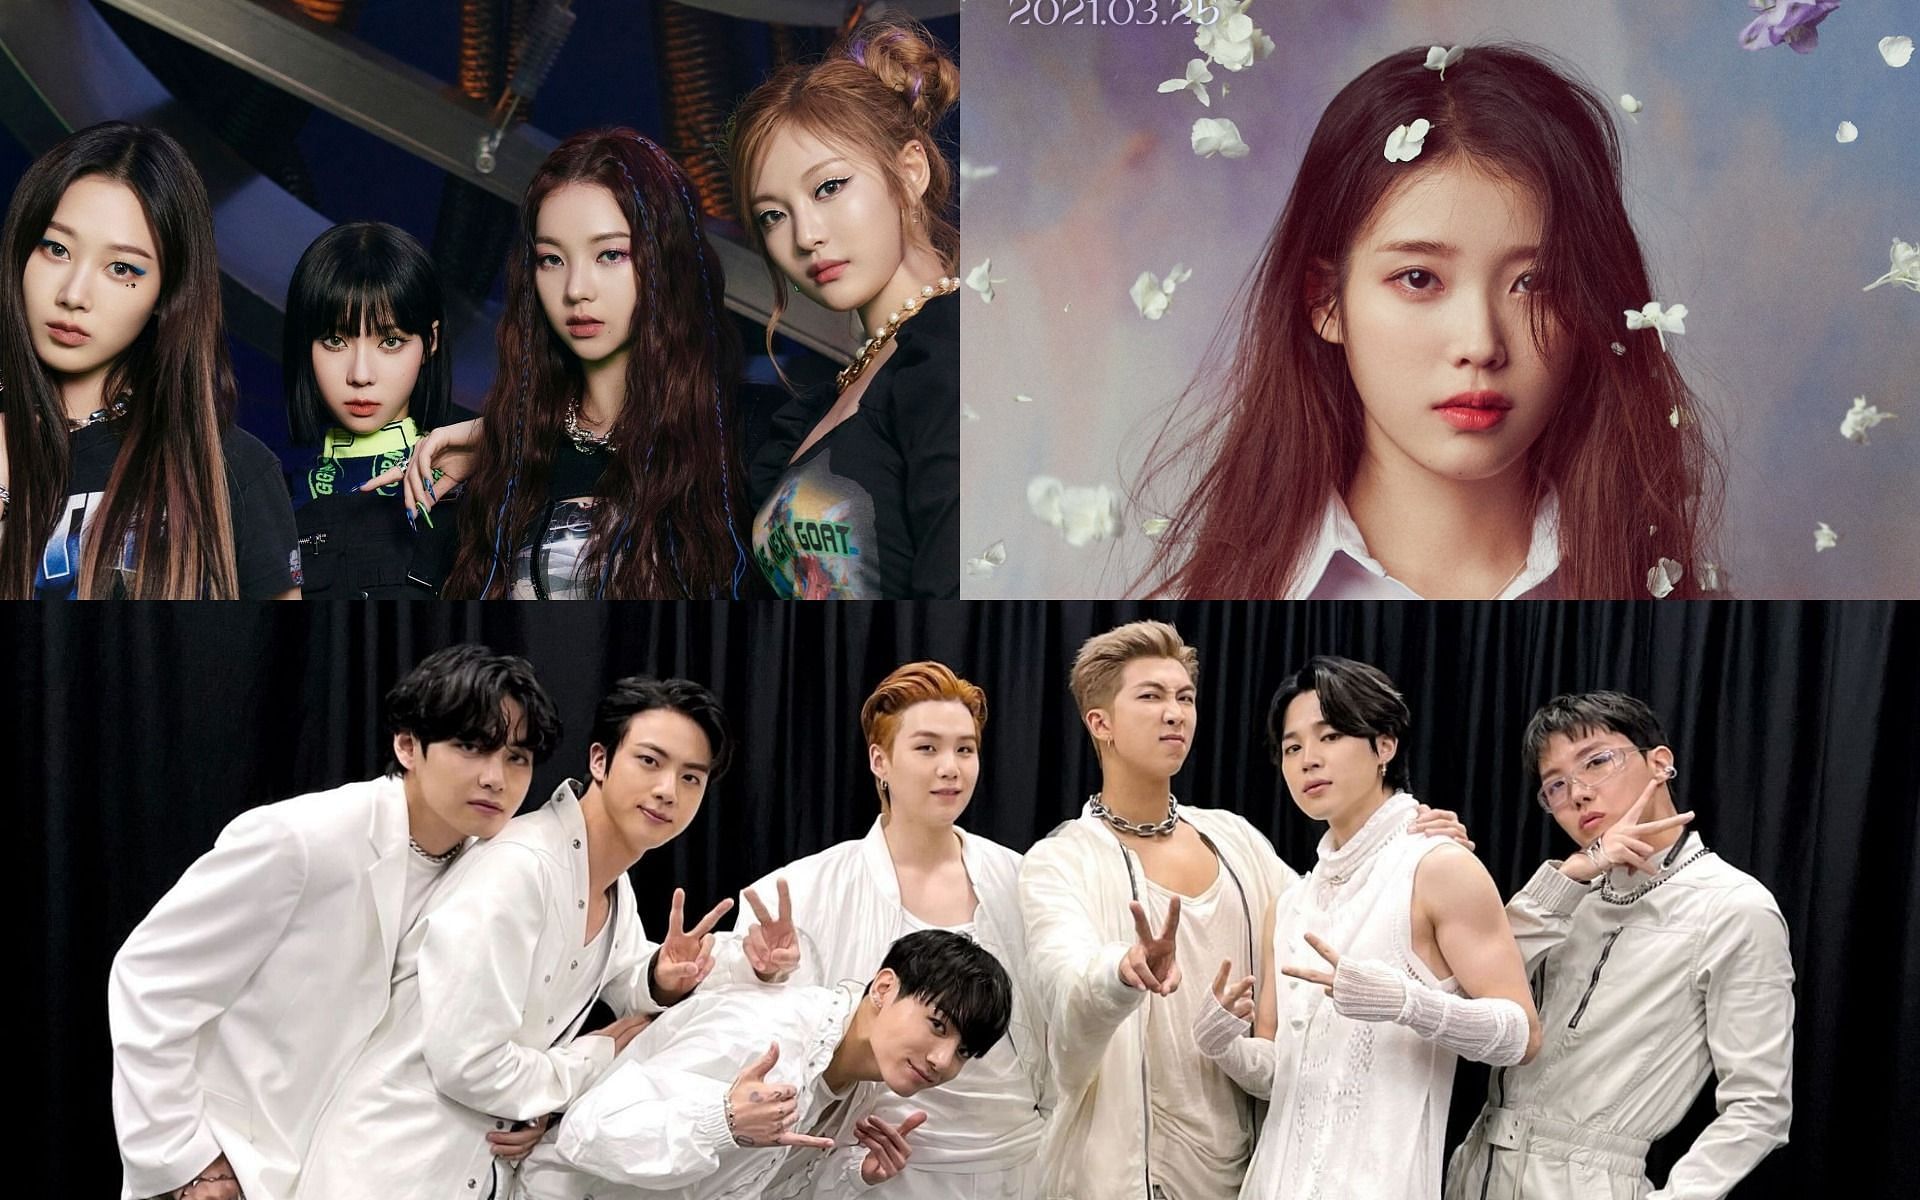 Winners of the 2021 MMA: BTS, IU, aespa, TXT and more